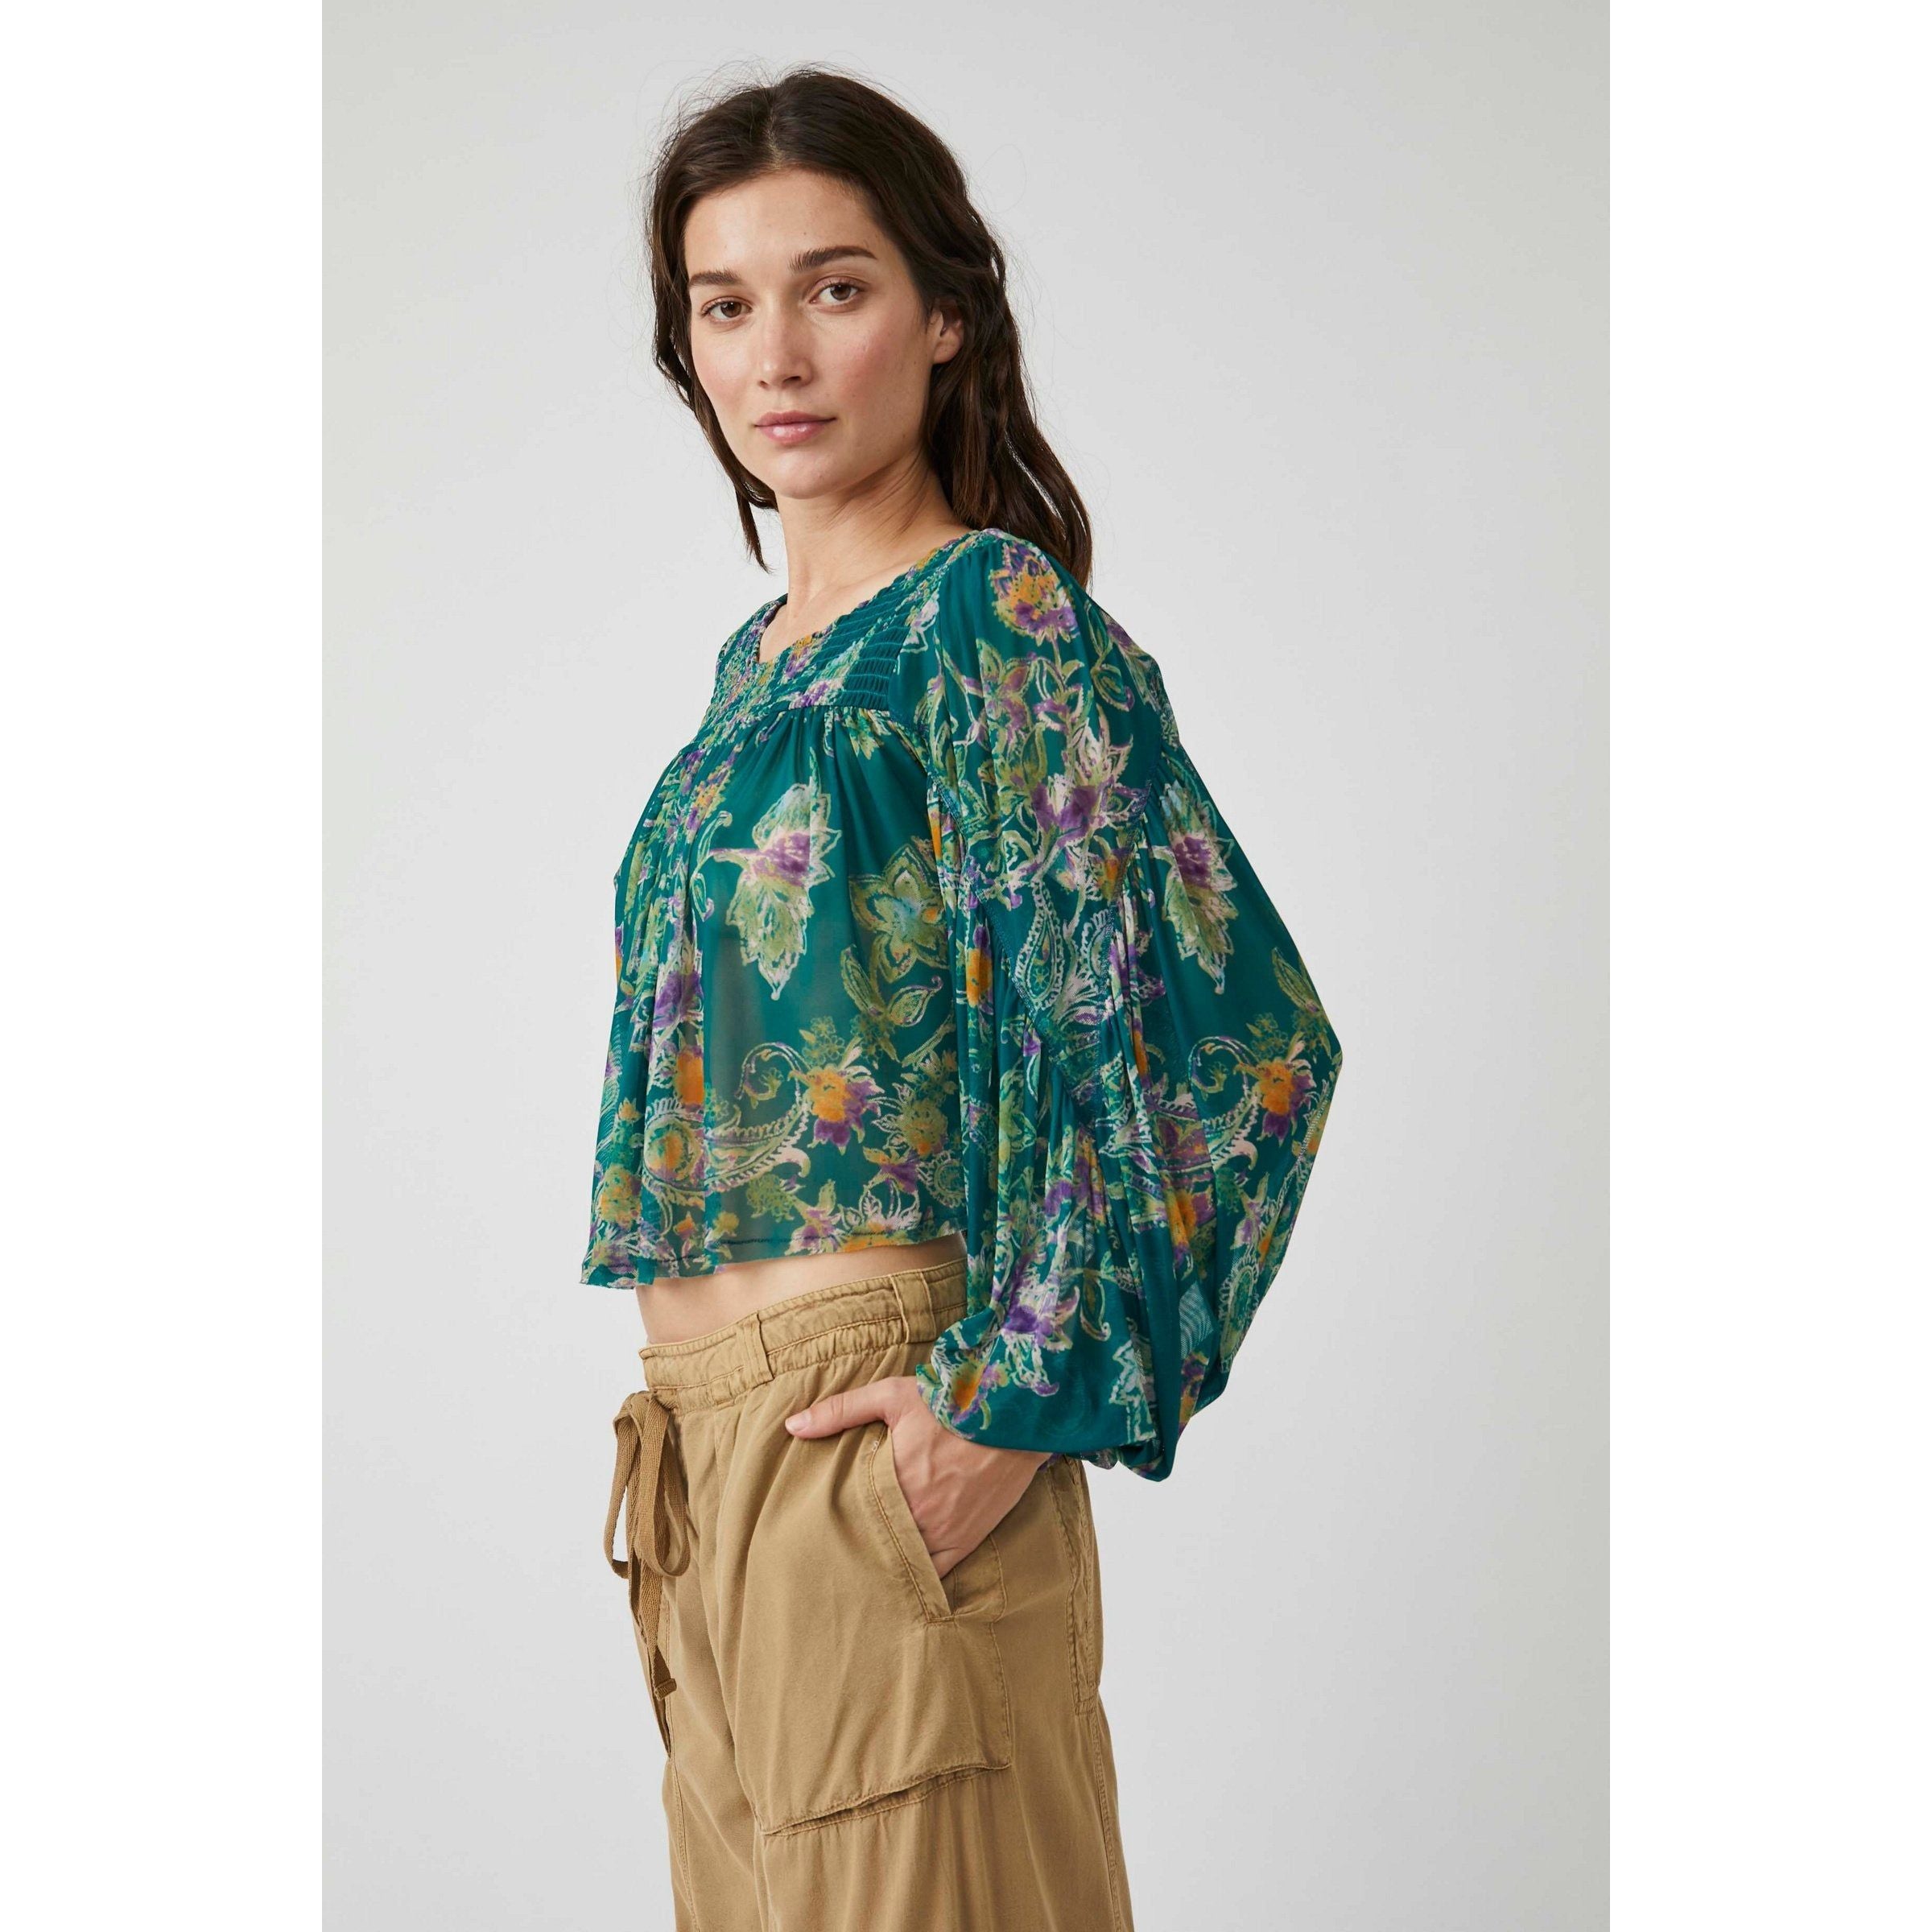 Free People - Up For Anything Top in Emerald-SQ4504122